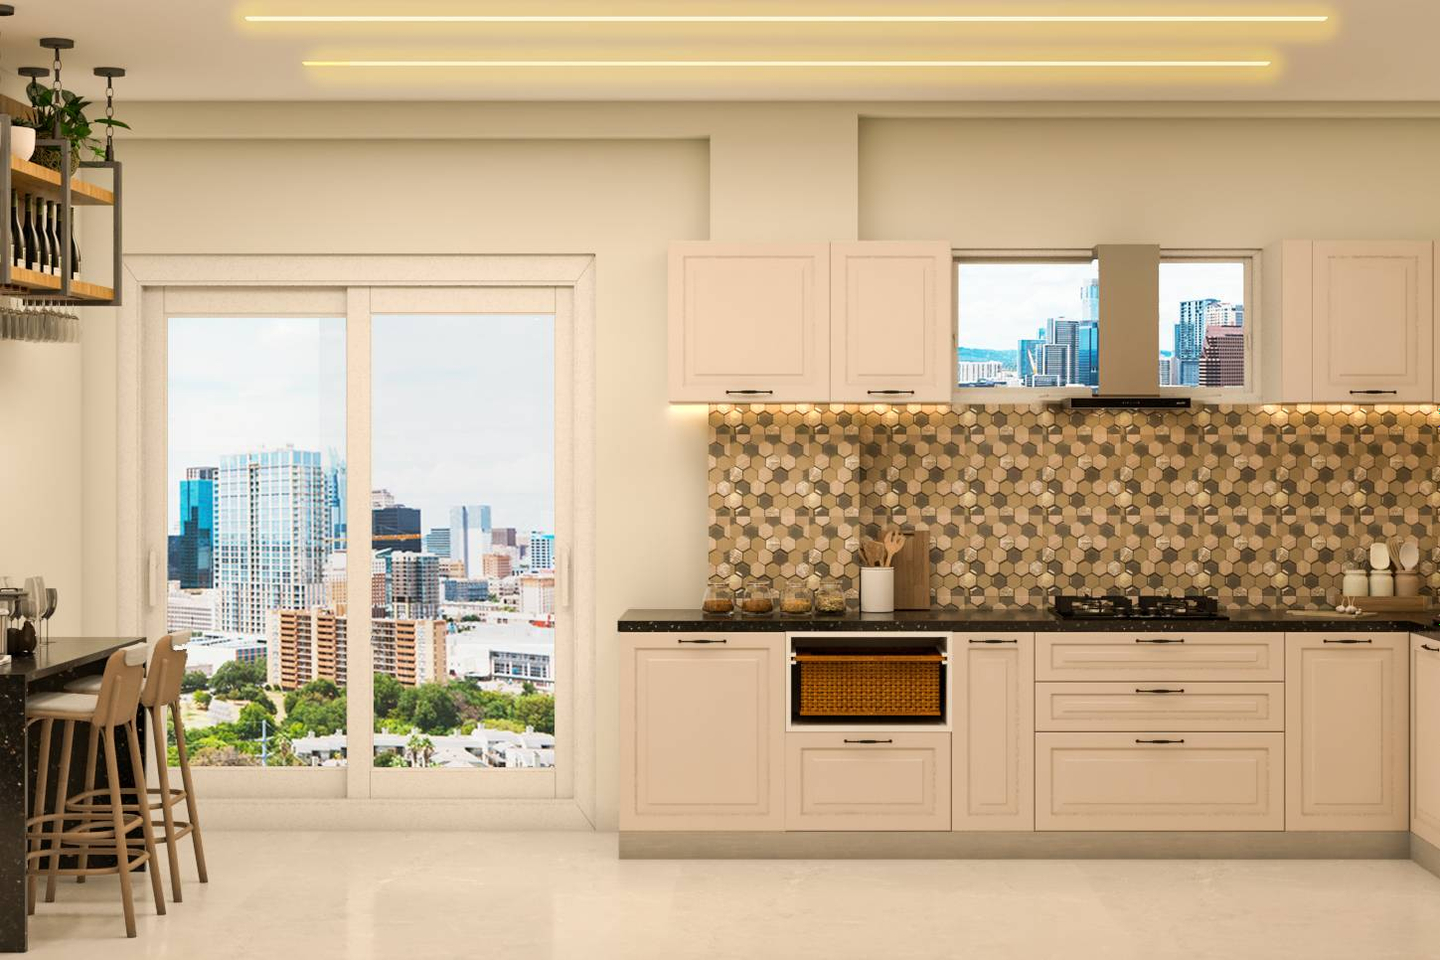 Modern L-Shaped Kitchen Design With Hexagonal-Patterned Dado